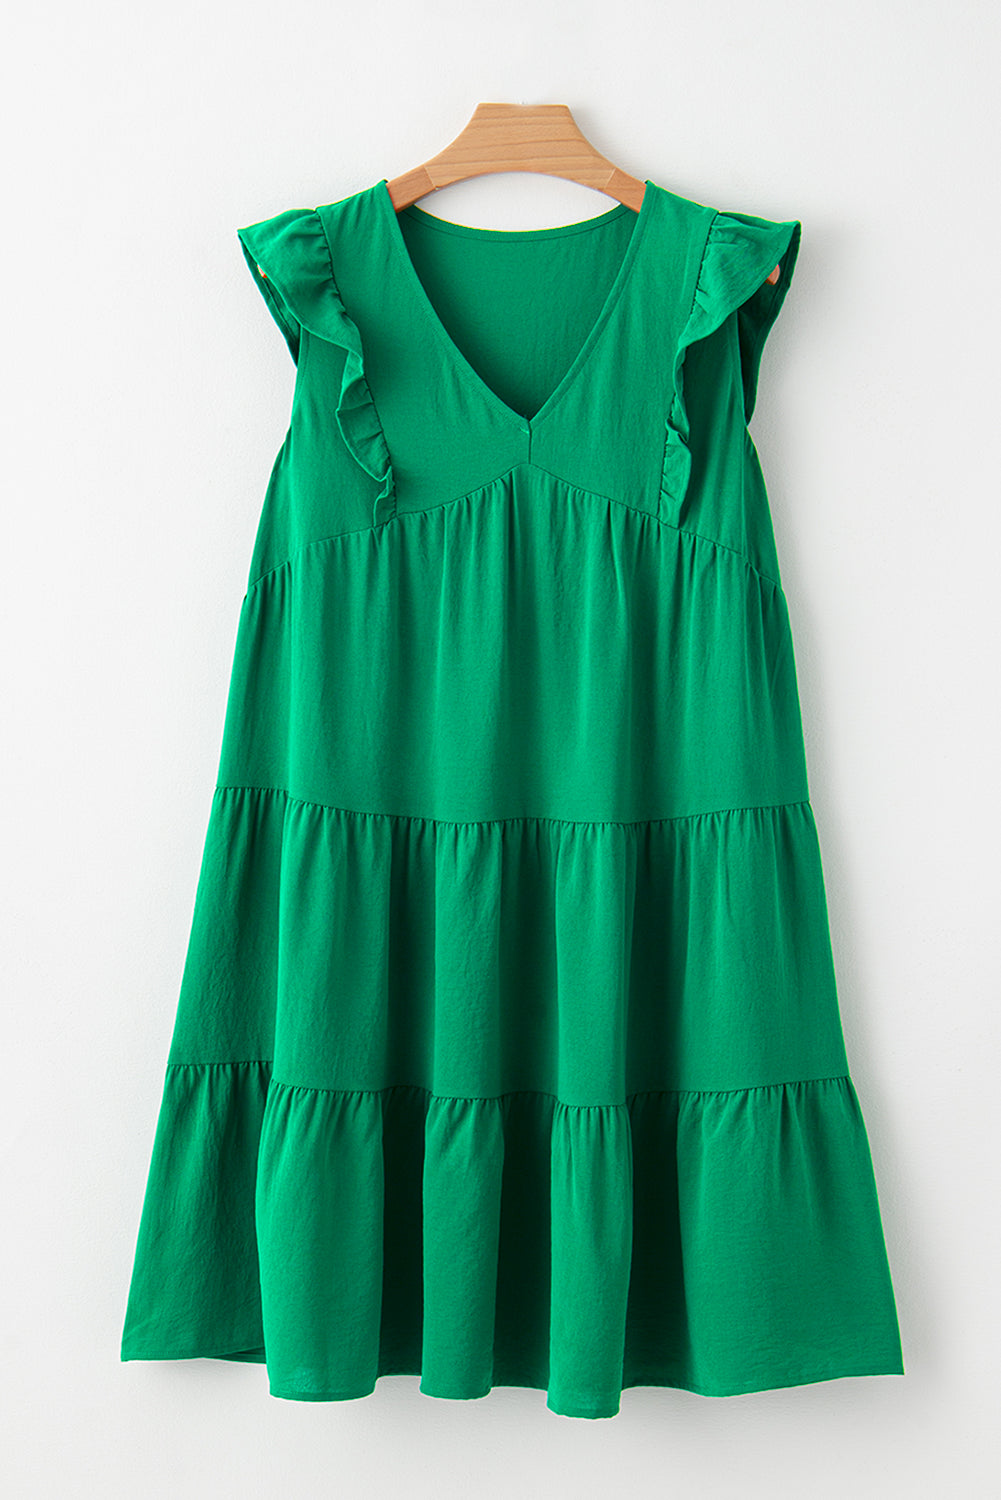 Bright Green Solid Color V Neck Ruffle Tiered Mini Dress Blue Zone Planet